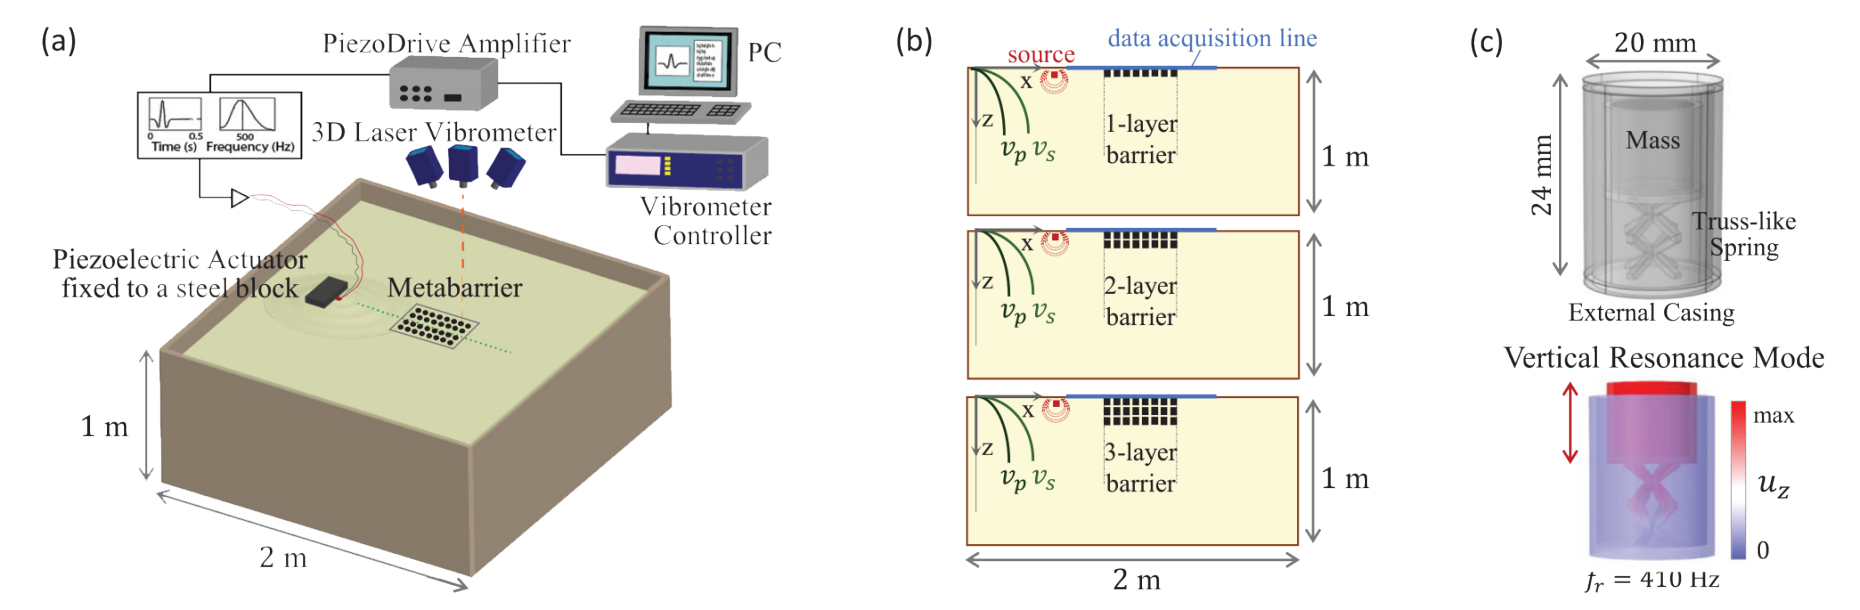 Figure reused from&nbsp;Appl. Phys. Lett. 117, 254103 (2020):&nbsp;(a) Schematic of the experimental setup. (b) Schematic of the vertical cross section of the box for the three investigated metabarrier configurations. (c) Model of the vertical oscillator